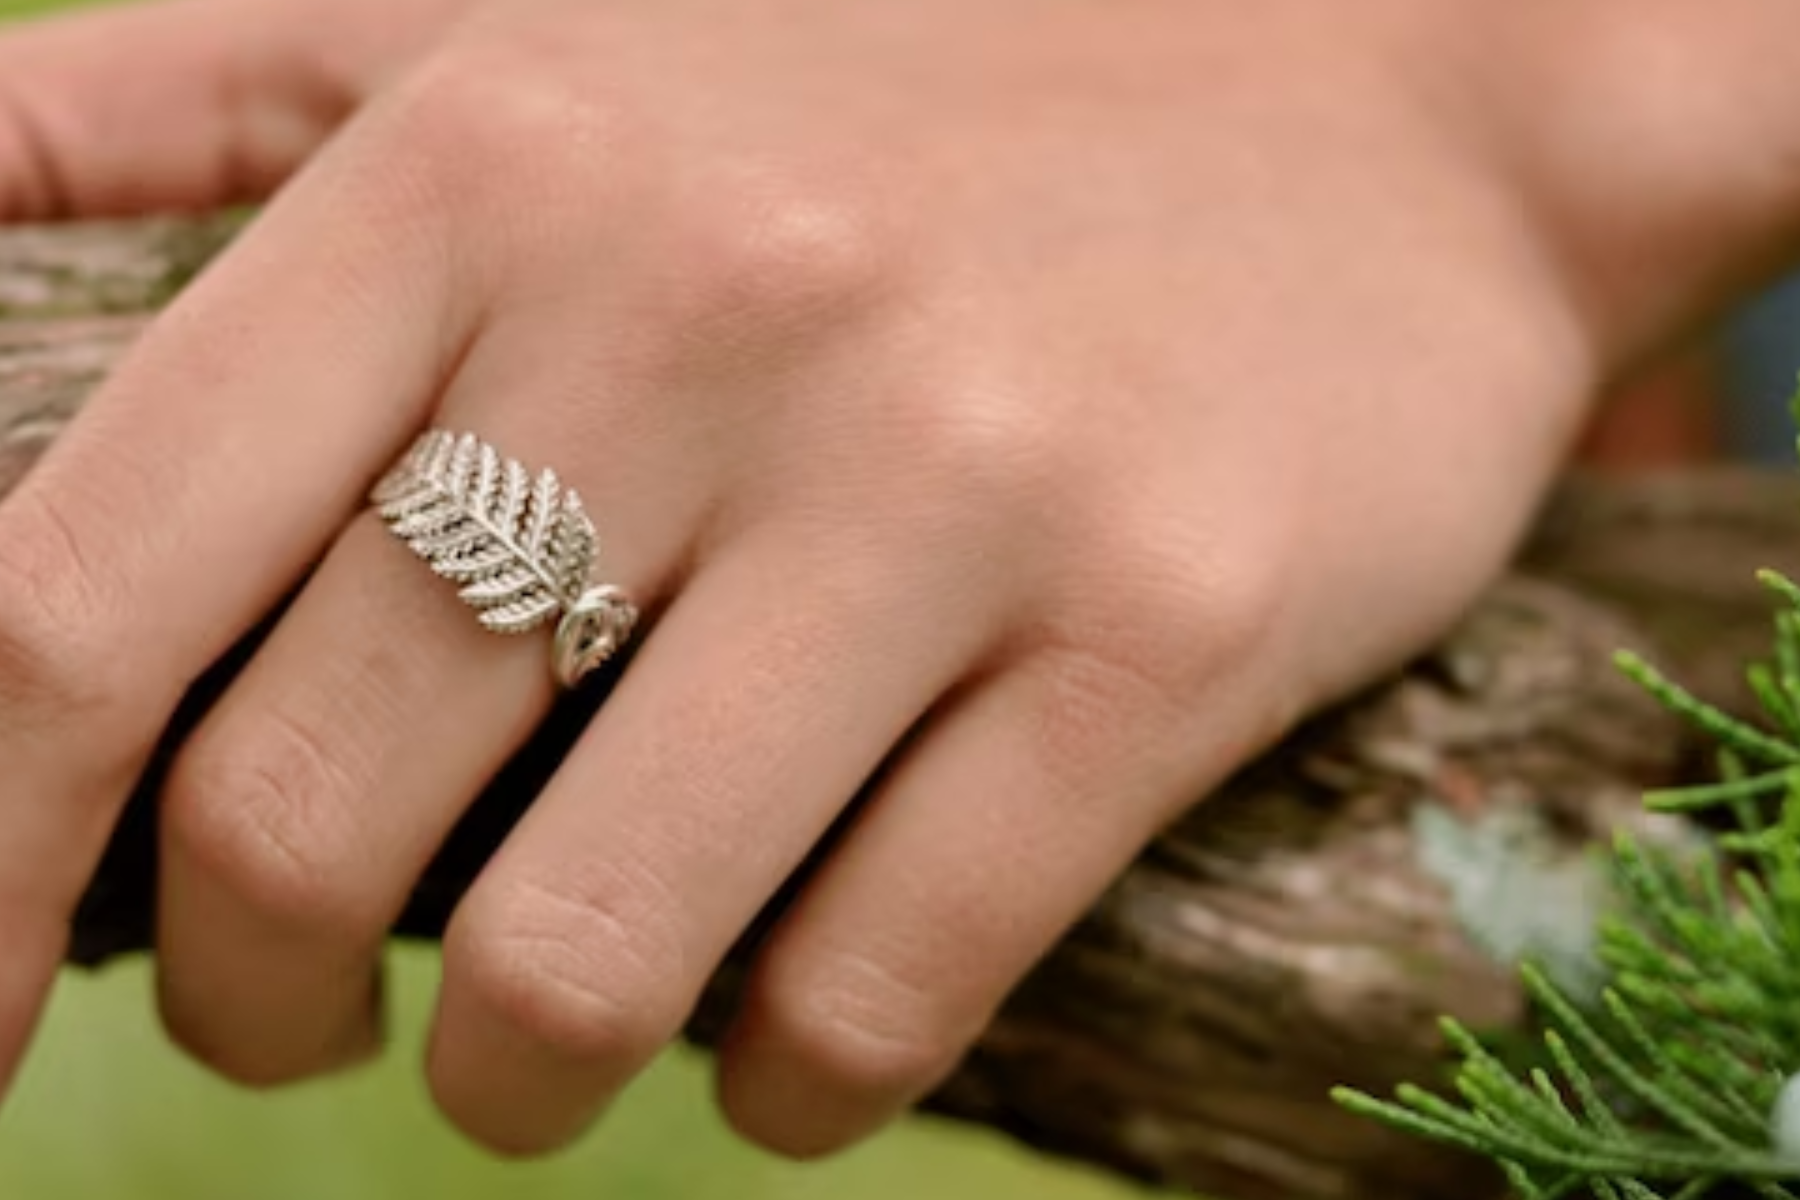 A close-up of a woman's hand holding a branch of a tree. The hand is adorned with a leaf ring